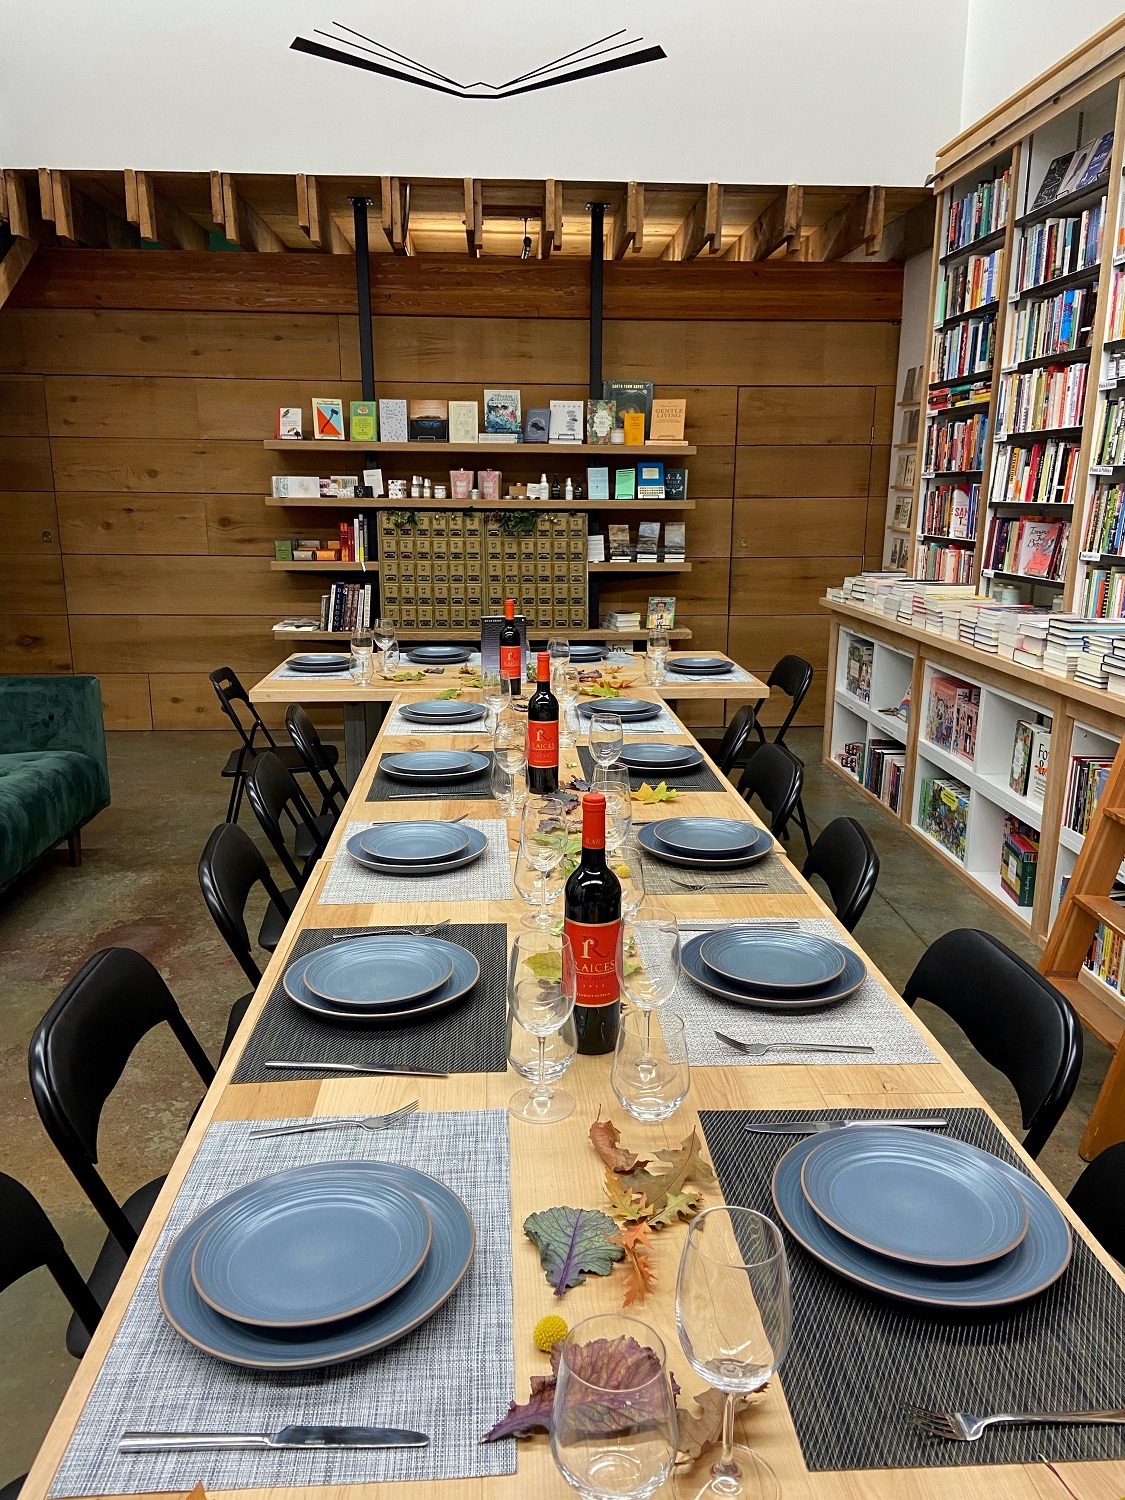 A long table with place settings inside a bookstore with a high ceiling.